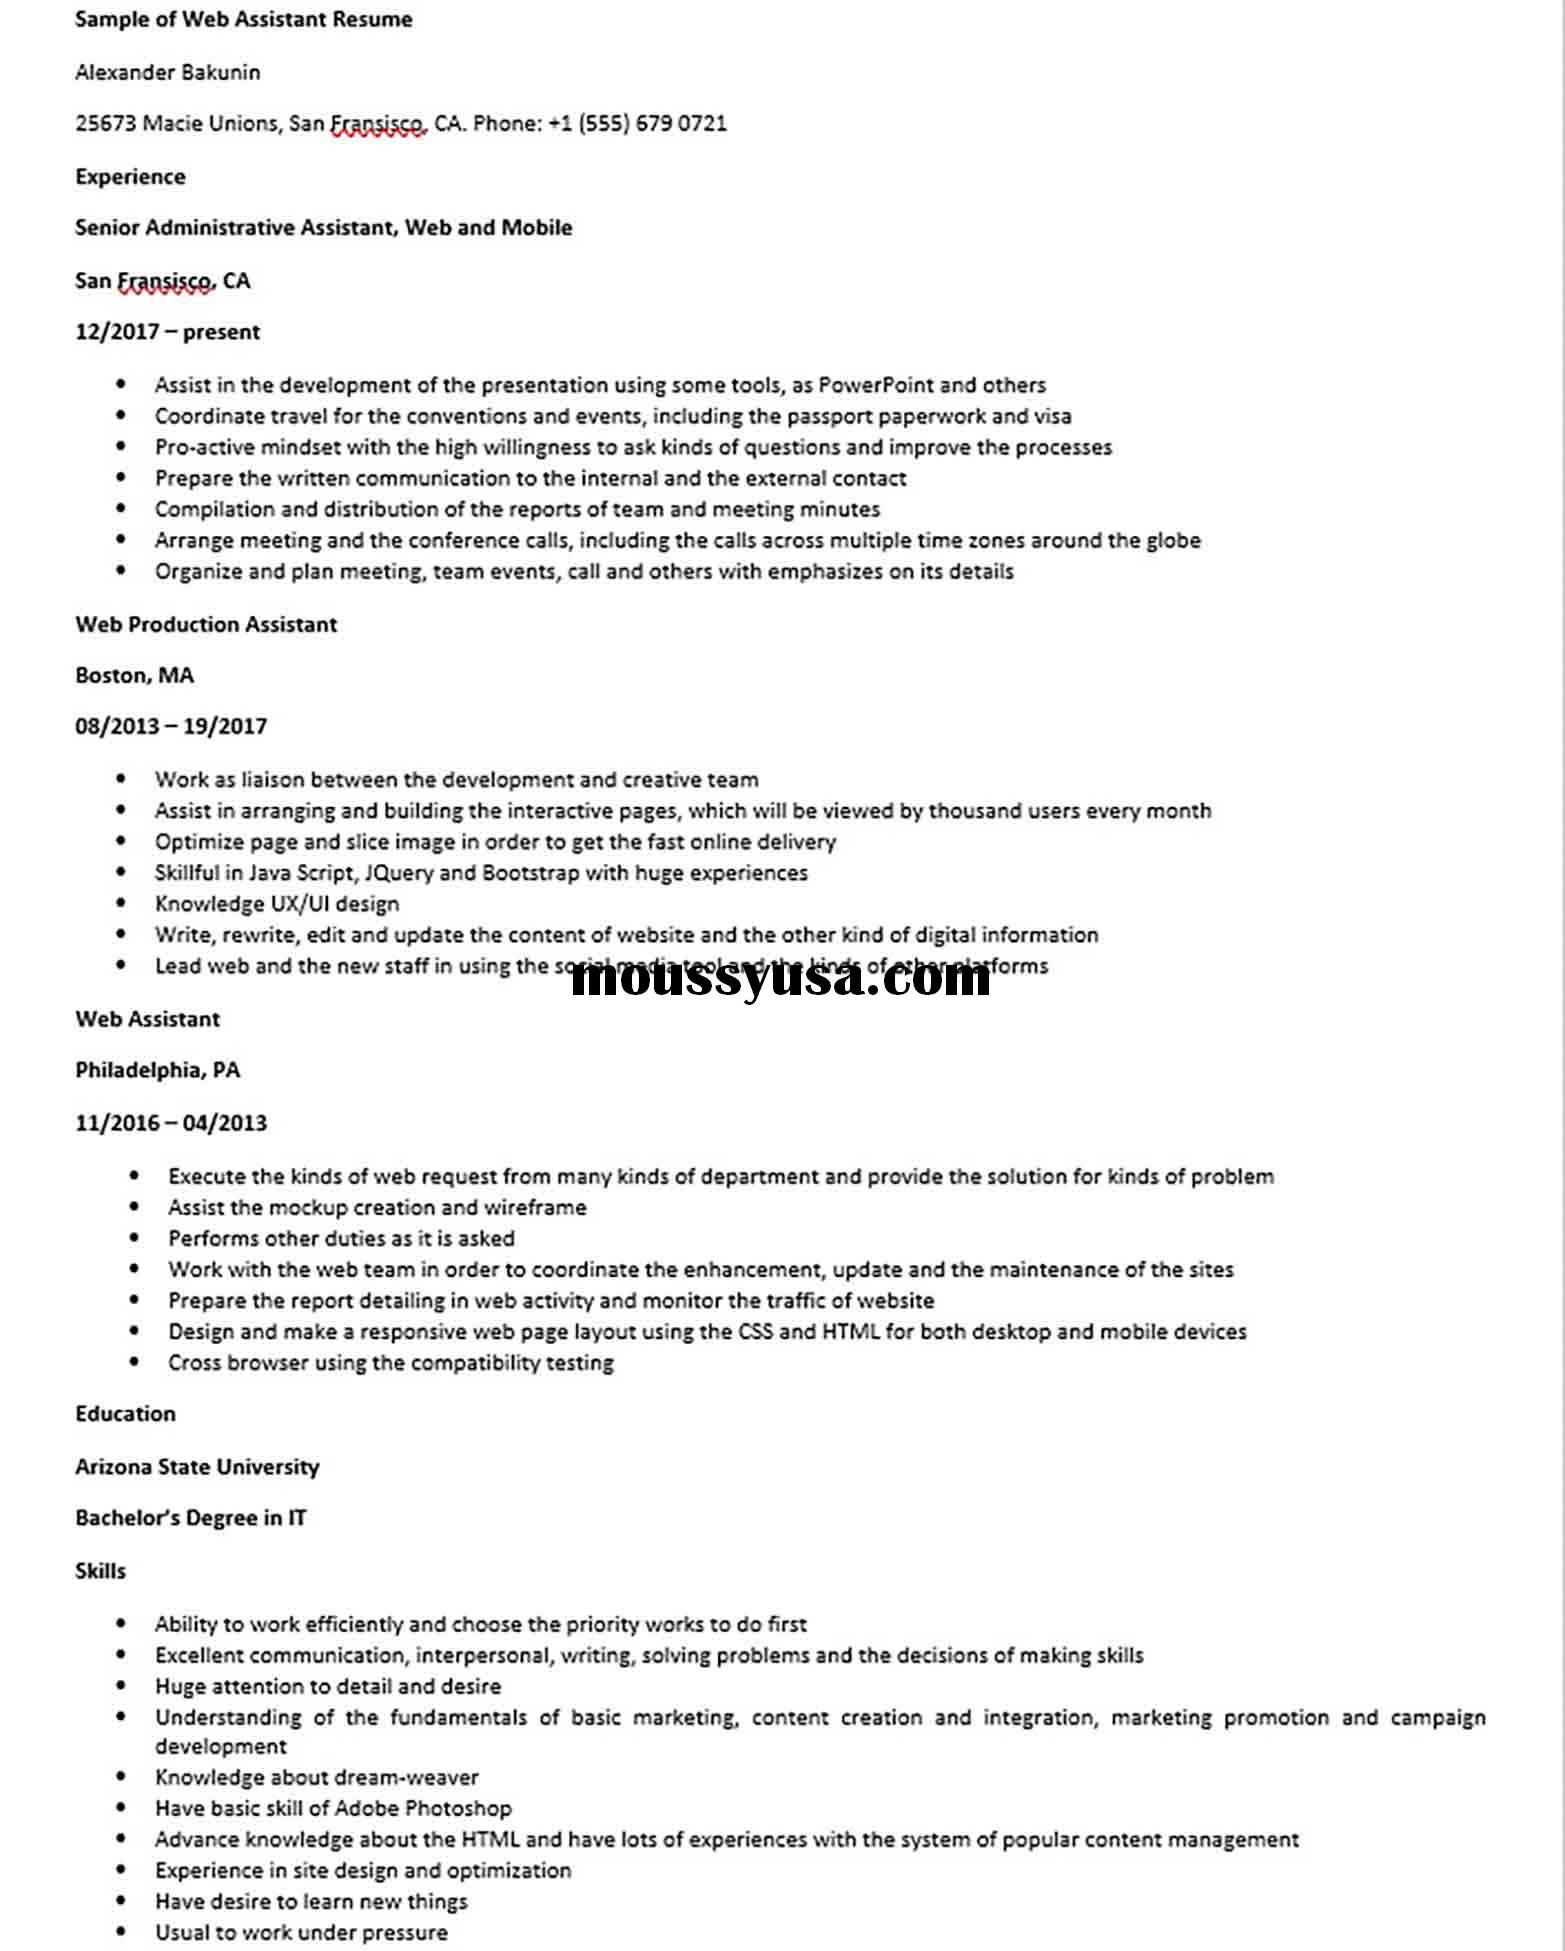 Sample of Web Assistant Resume